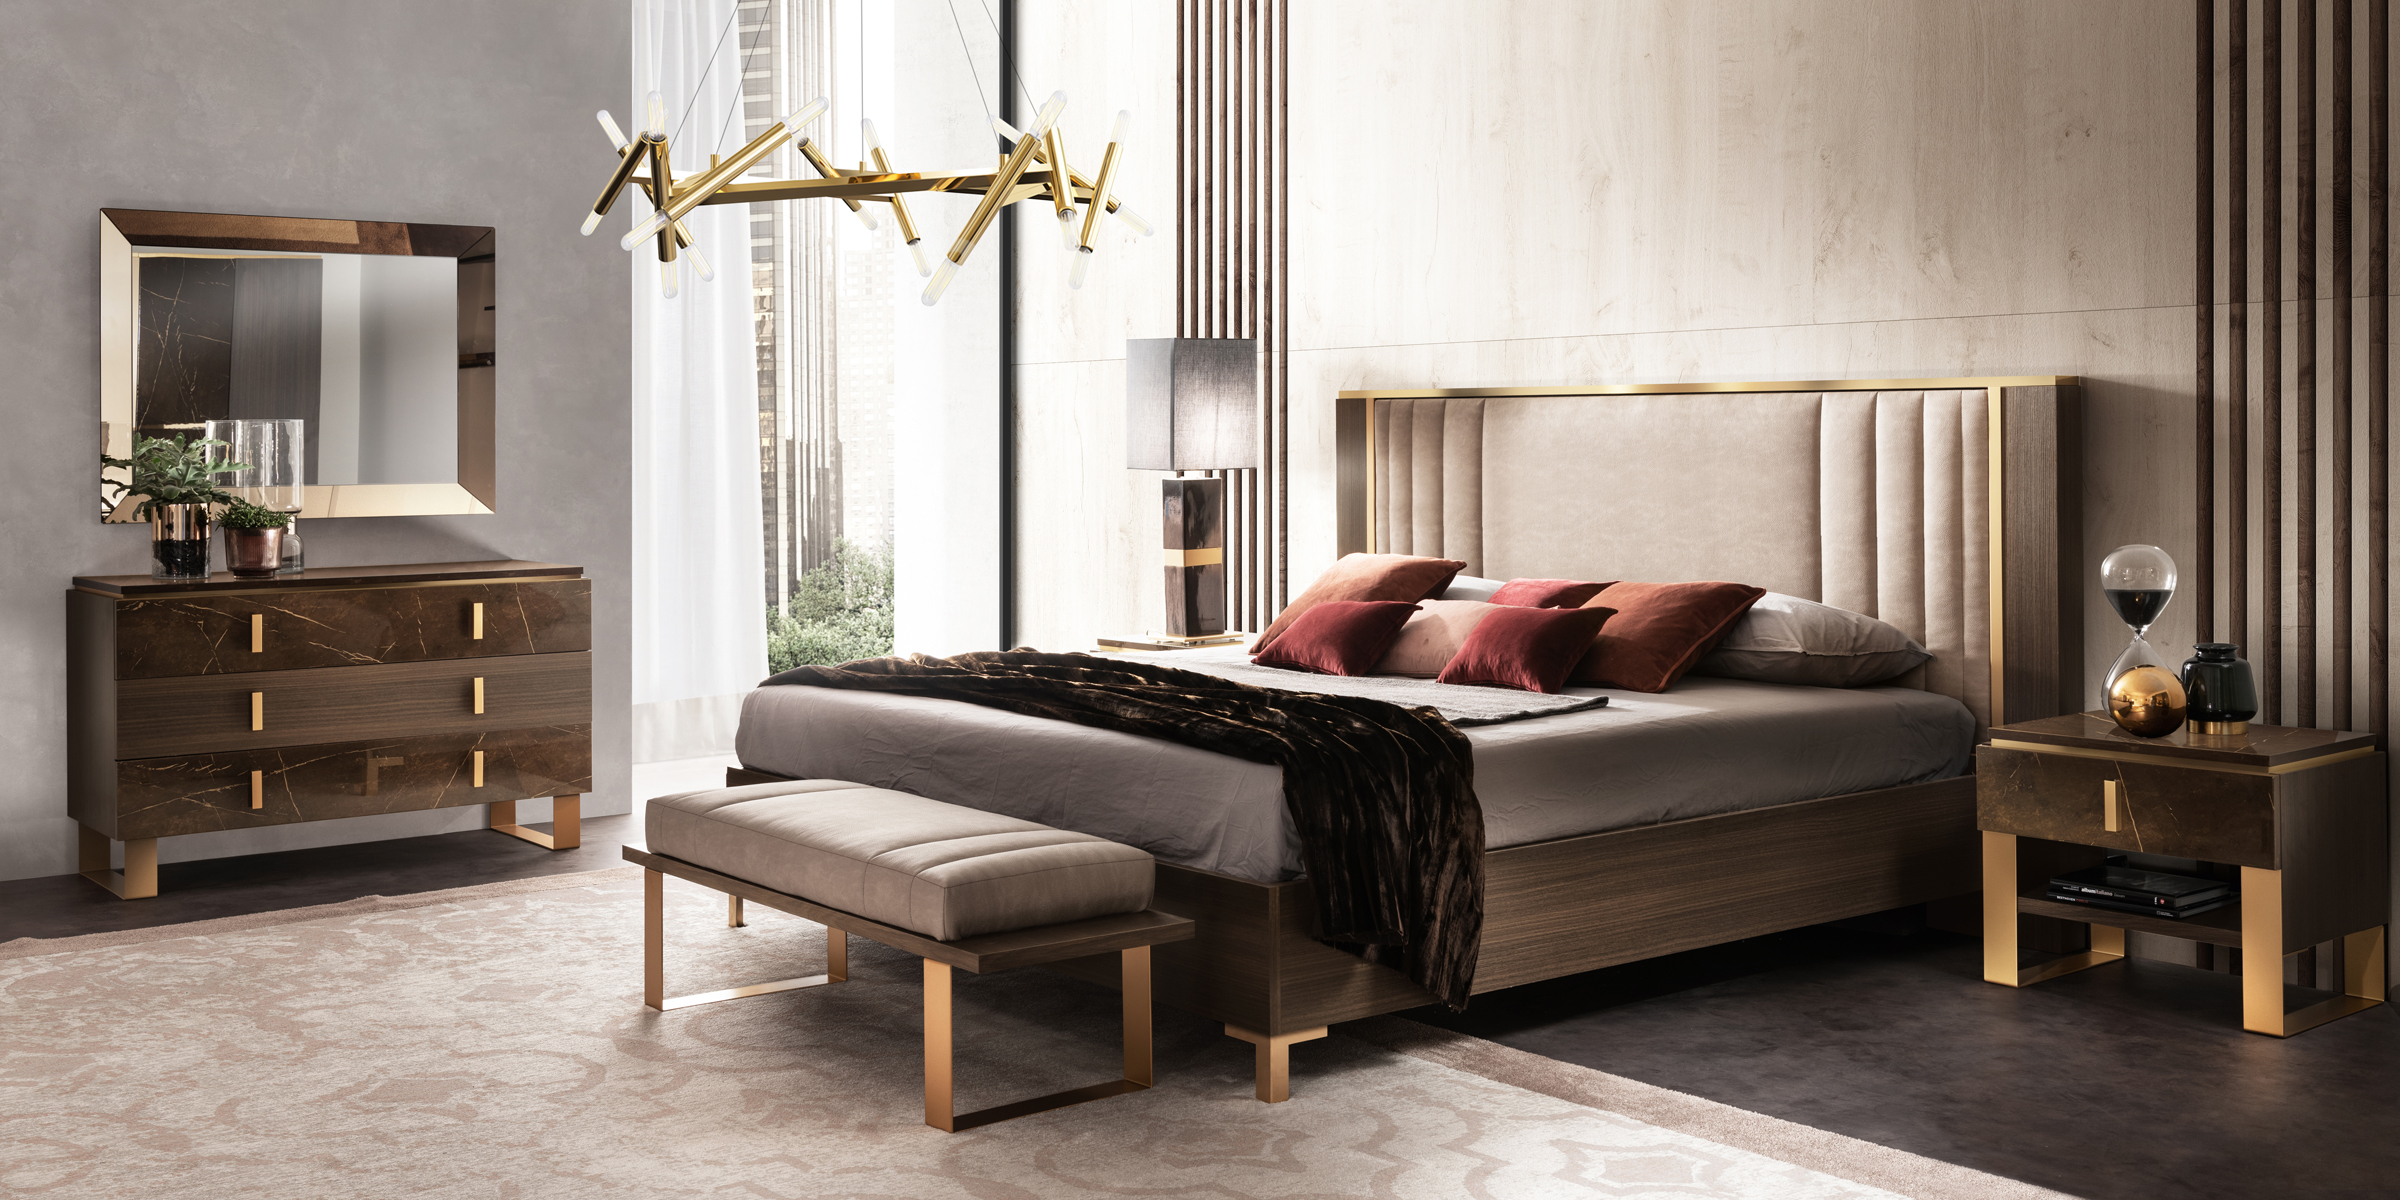 Bedroom Furniture Wardrobes Essenza Bedroom by Arredoclassic, Italy Additional